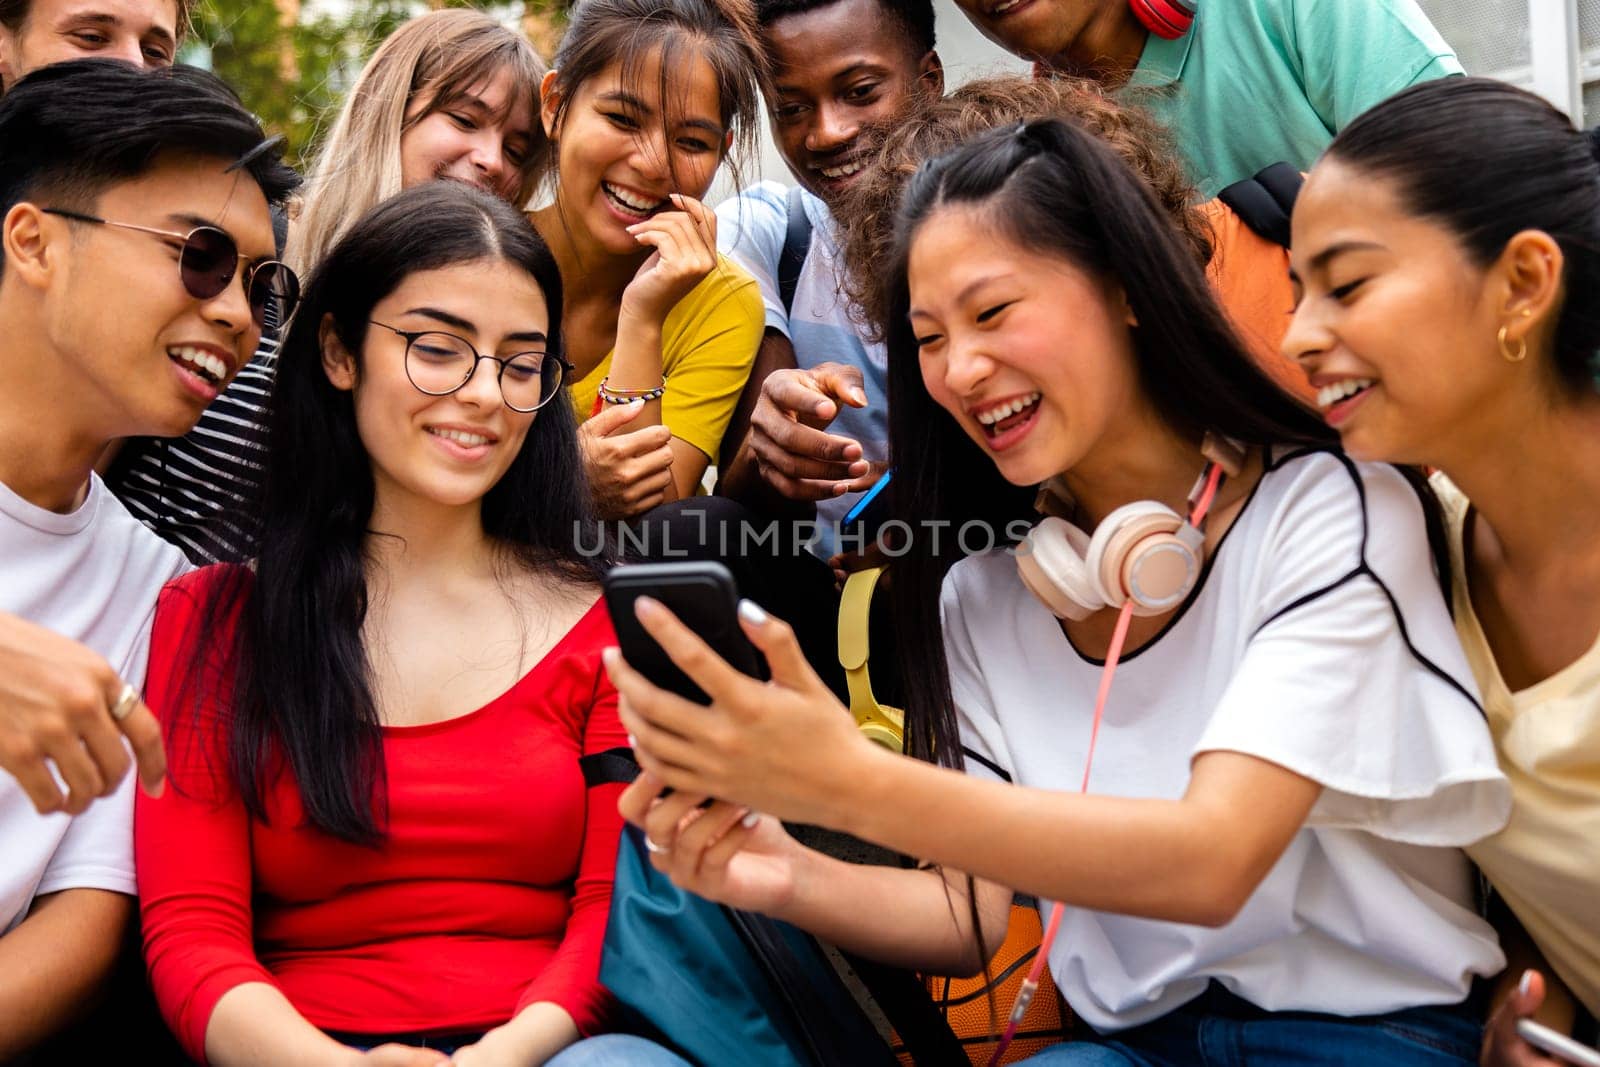 Multiracial group of teen friends looking at phone together outdoors. Social media concept.